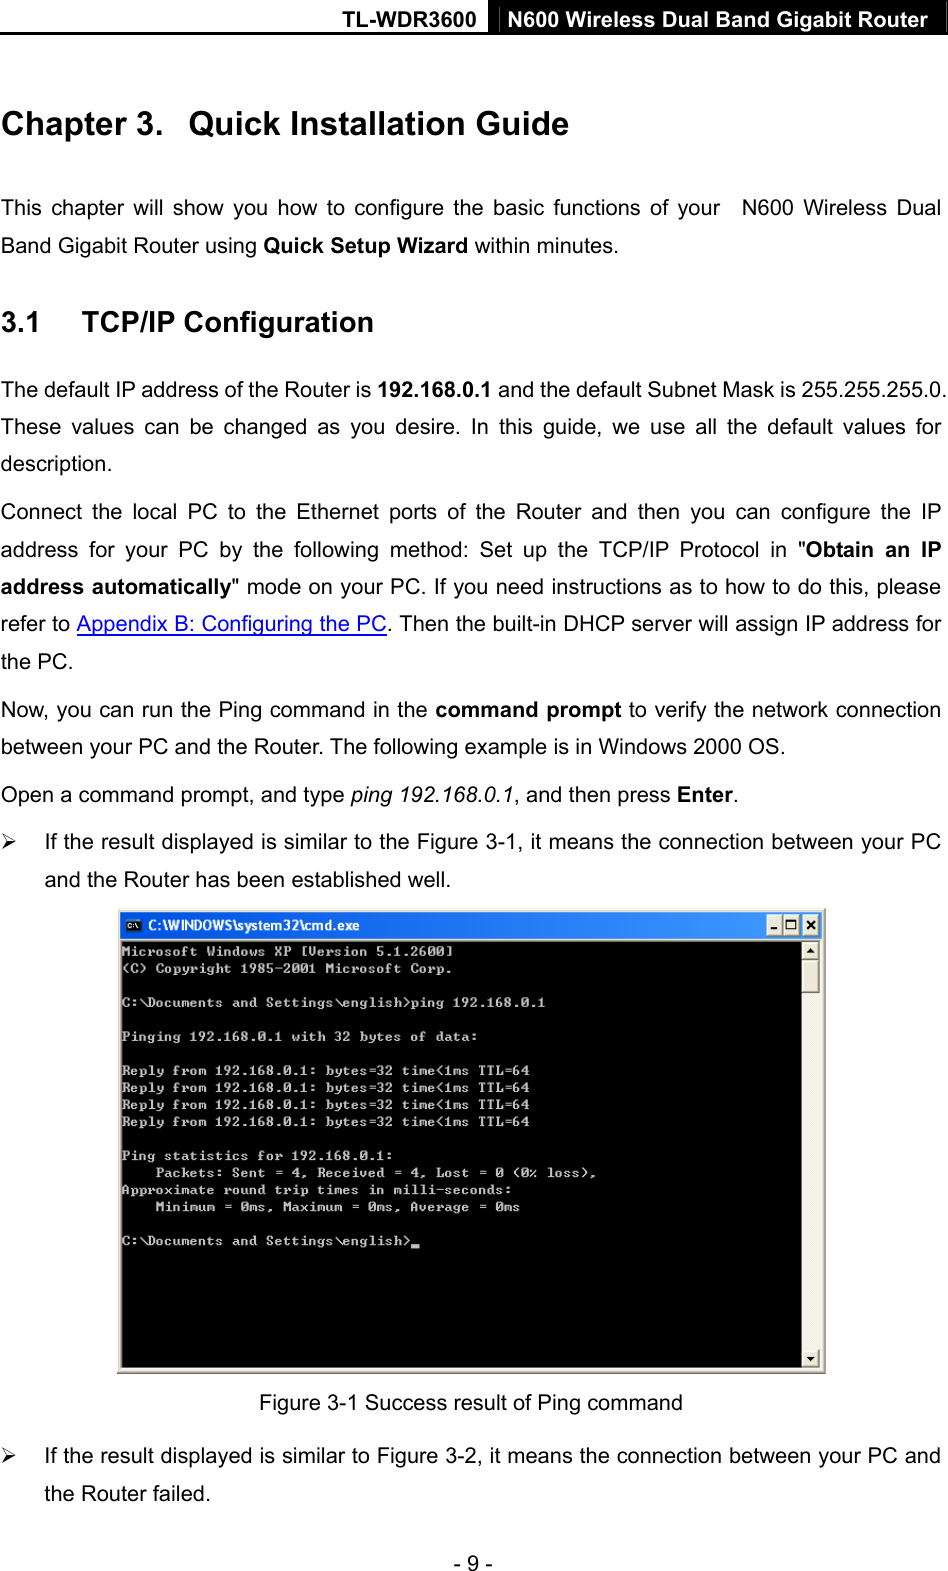 TL-WDR3600 N600 Wireless Dual Band Gigabit Router  - 9 - Chapter 3.  Quick Installation Guide This chapter will show you how to configure the basic functions of your  N600 Wireless Dual Band Gigabit Router using Quick Setup Wizard within minutes. 3.1  TCP/IP Configuration The default IP address of the Router is 192.168.0.1 and the default Subnet Mask is 255.255.255.0. These values can be changed as you desire. In this guide, we use all the default values for description. Connect the local PC to the Ethernet ports of the Router and then you can configure the IP address for your PC by the following method: Set up the TCP/IP Protocol in &quot;Obtain an IP address automatically&quot; mode on your PC. If you need instructions as to how to do this, please refer to Appendix B: Configuring the PC. Then the built-in DHCP server will assign IP address for the PC. Now, you can run the Ping command in the command prompt to verify the network connection between your PC and the Router. The following example is in Windows 2000 OS. Open a command prompt, and type ping 192.168.0.1, and then press Enter. ¾  If the result displayed is similar to the Figure 3-1, it means the connection between your PC and the Router has been established well.    Figure 3-1 Success result of Ping command ¾  If the result displayed is similar to Figure 3-2, it means the connection between your PC and the Router failed.   